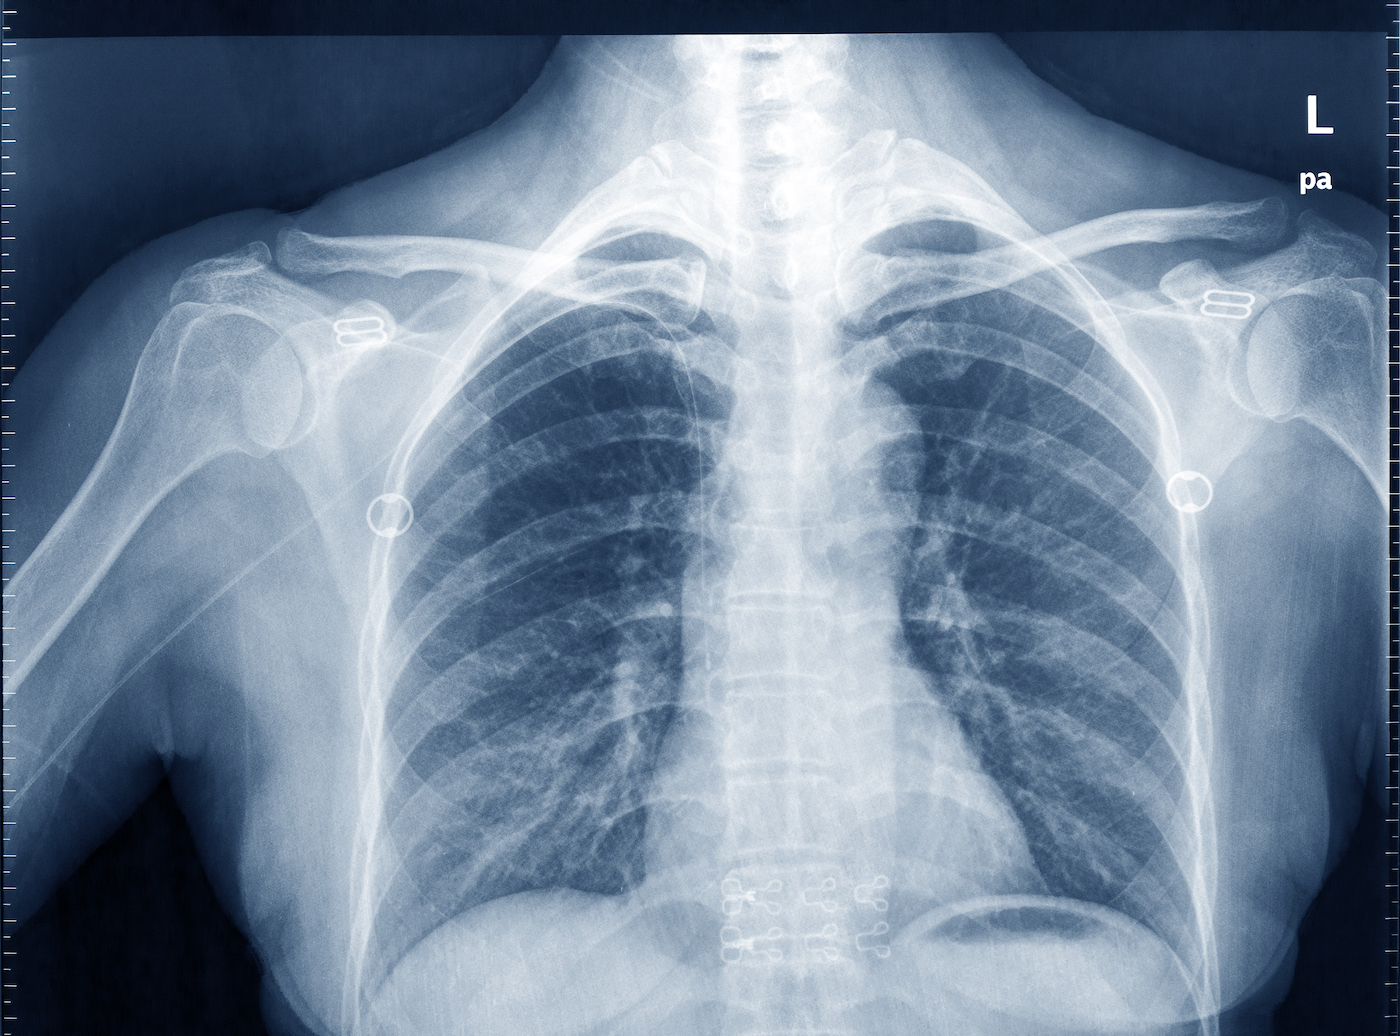 How AI Could Predict Heart Disease From Chest X-Rays